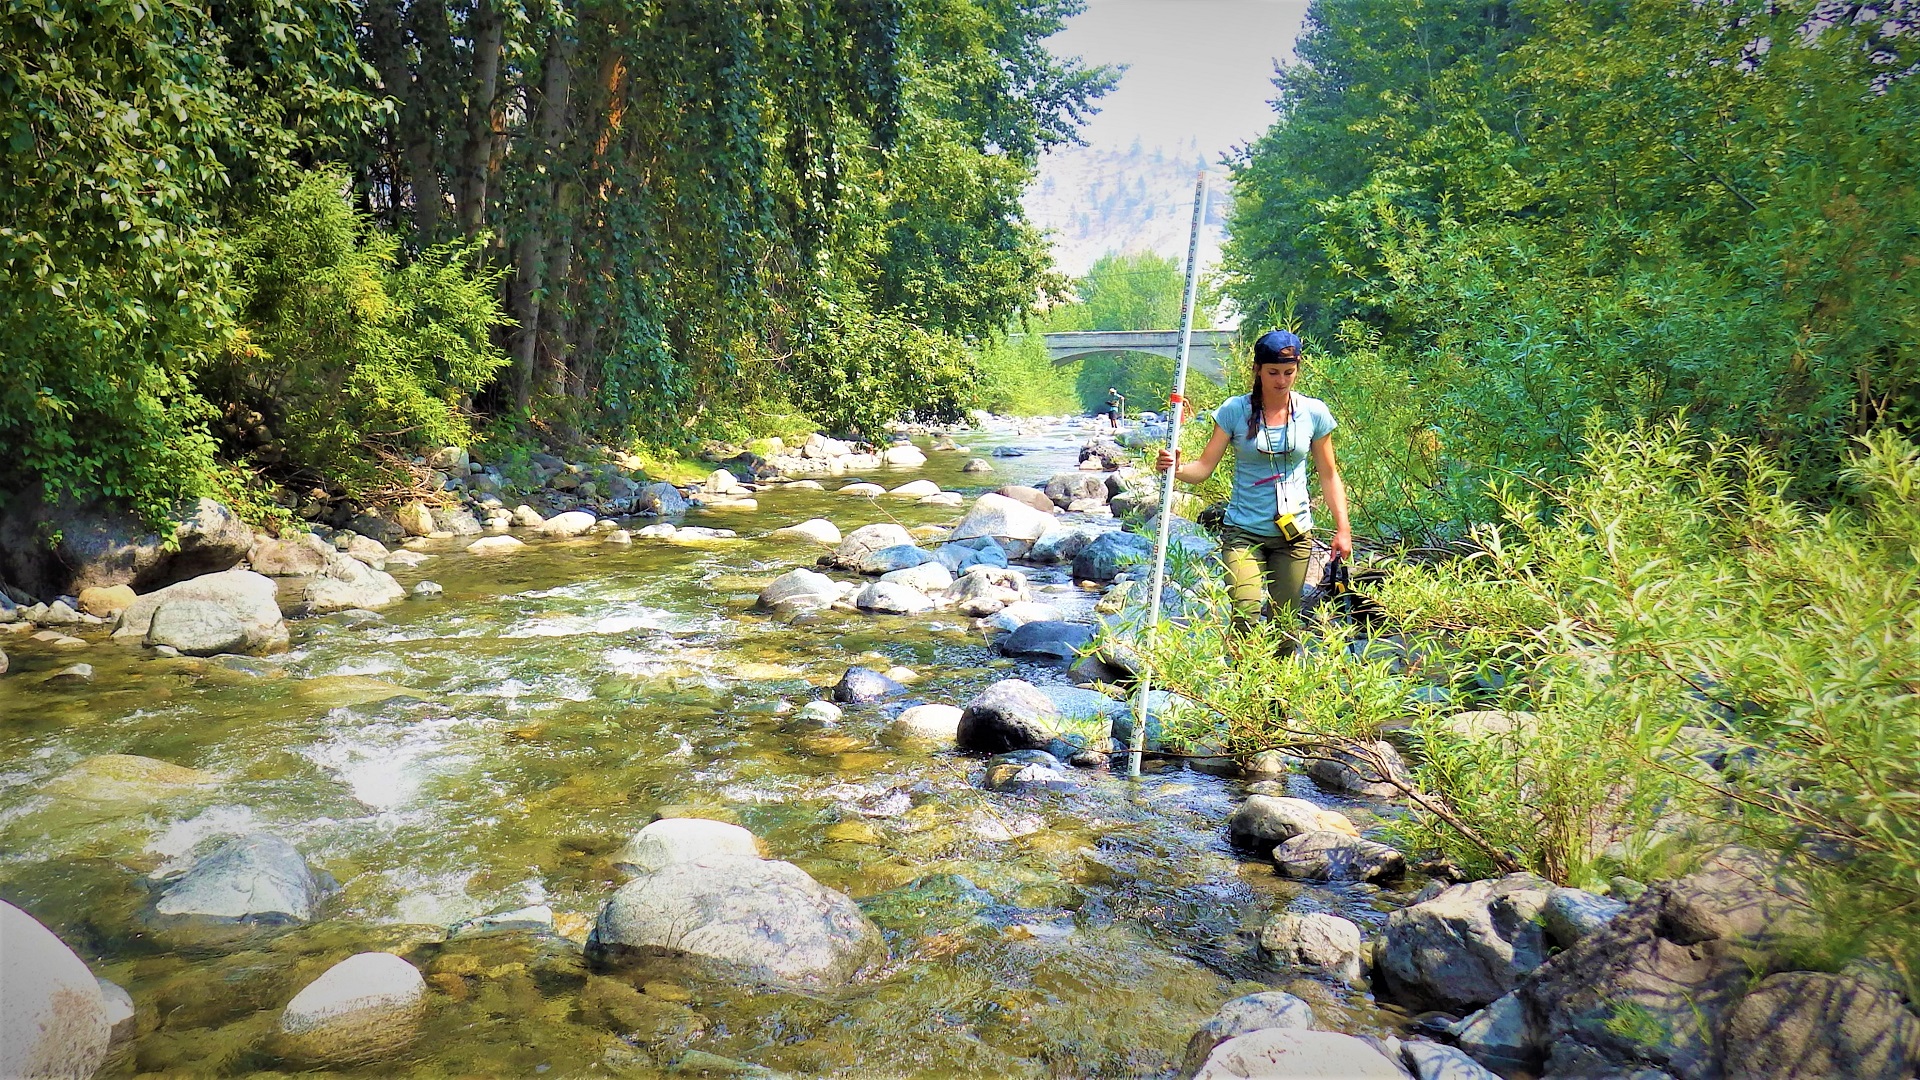 A person walking up the bank of a rocky stream holding a measuring rod